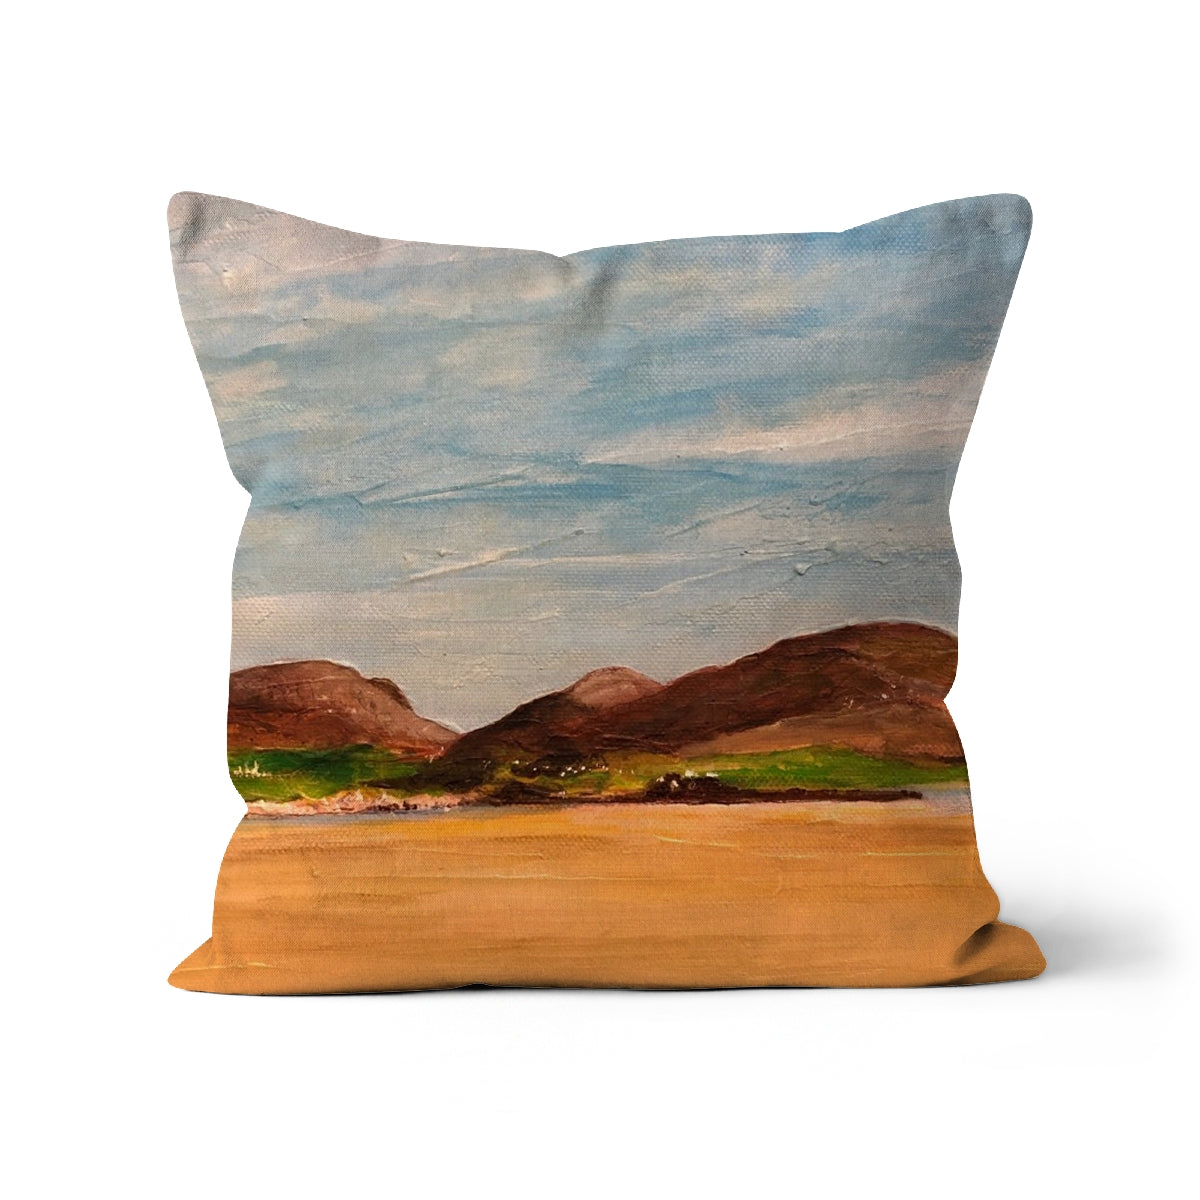 Uig Sands Lewis Art Gifts Cushion-Cushions-Hebridean Islands Art Gallery-Linen-24"x24"-Paintings, Prints, Homeware, Art Gifts From Scotland By Scottish Artist Kevin Hunter